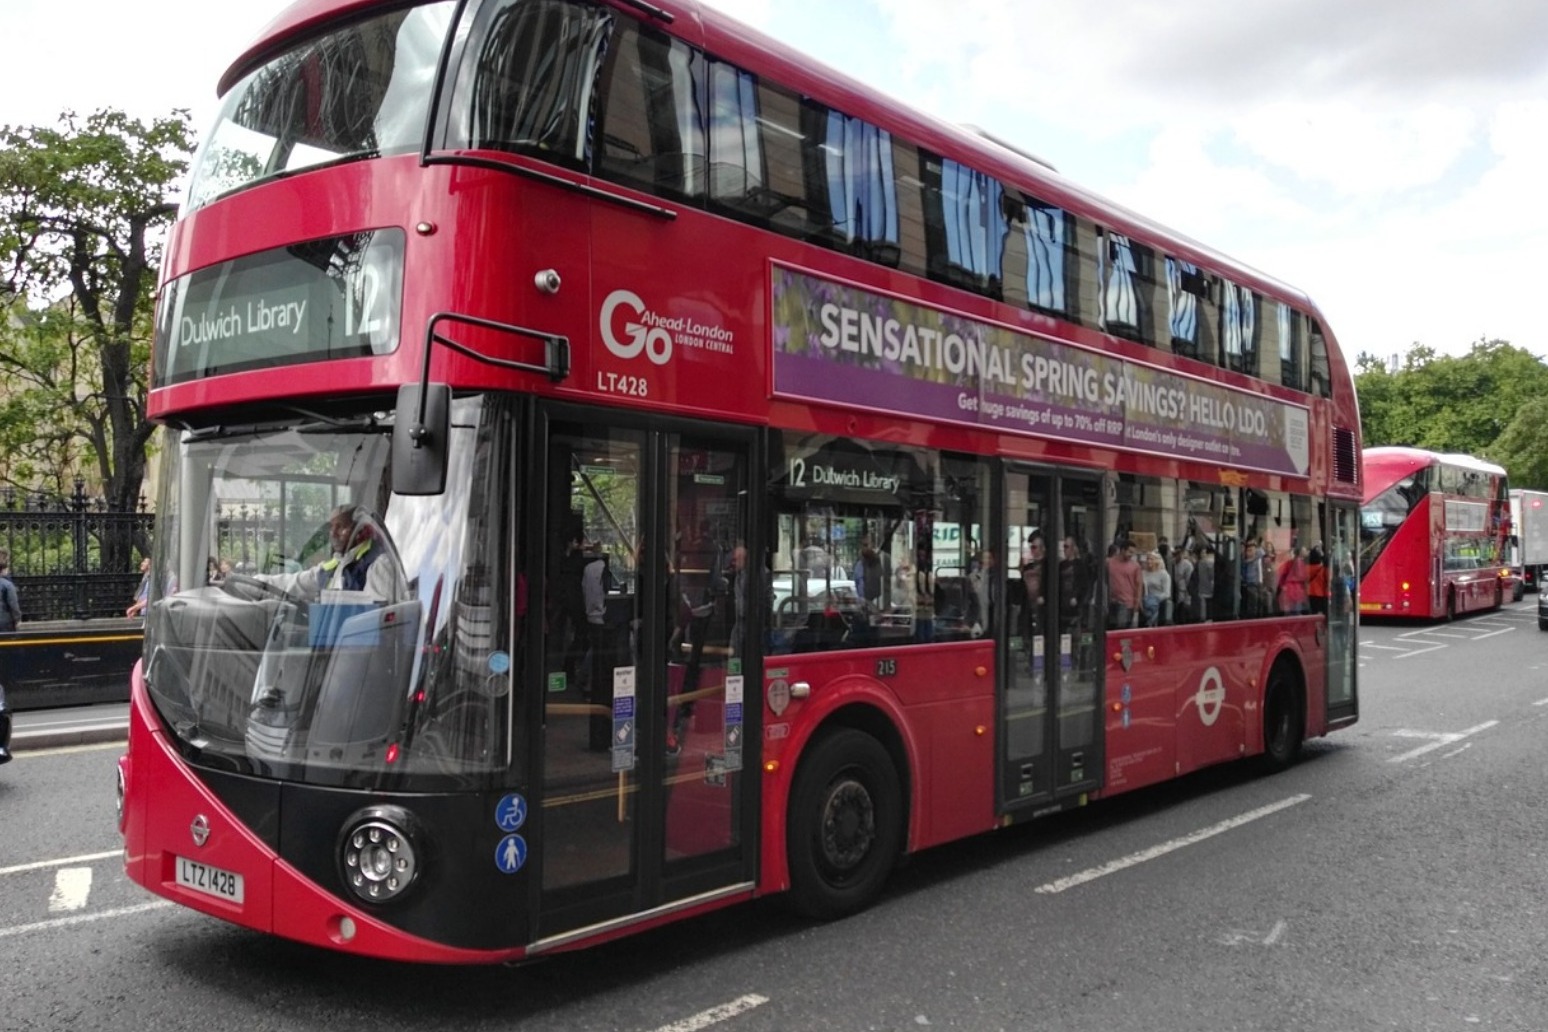 Calls for free bus travel to improve the environment 